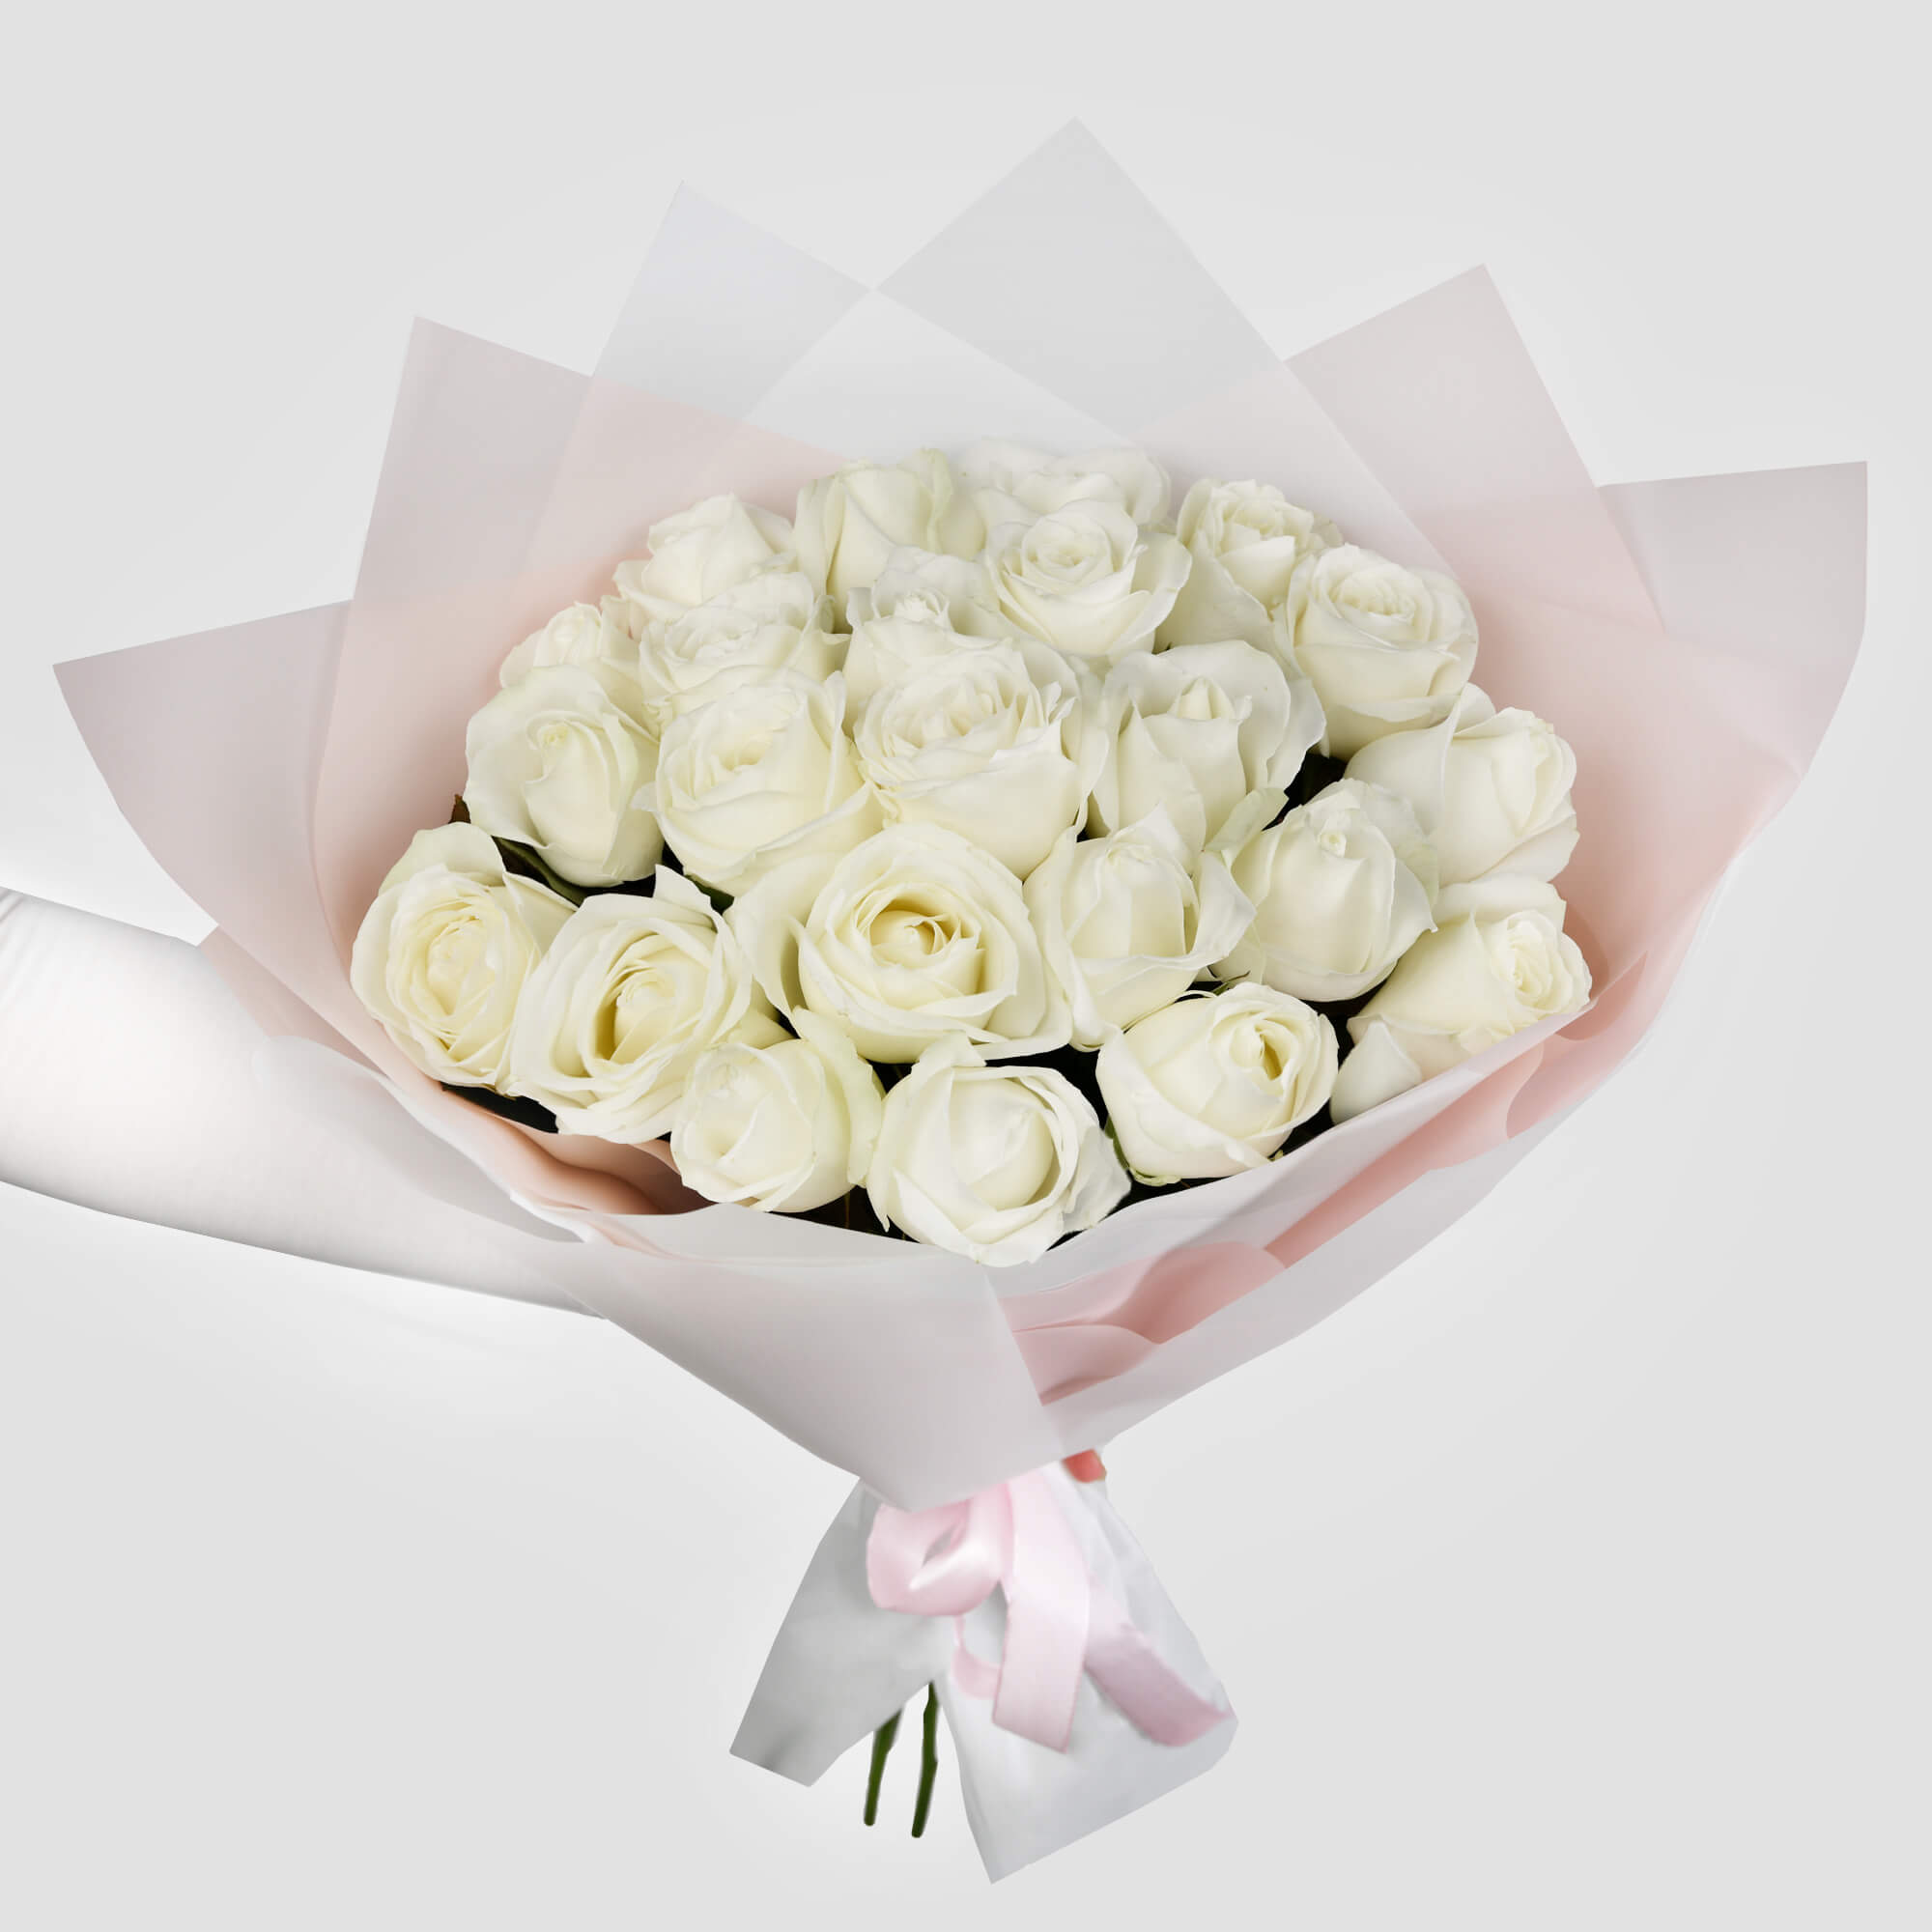 Bouquet of 23 white roses